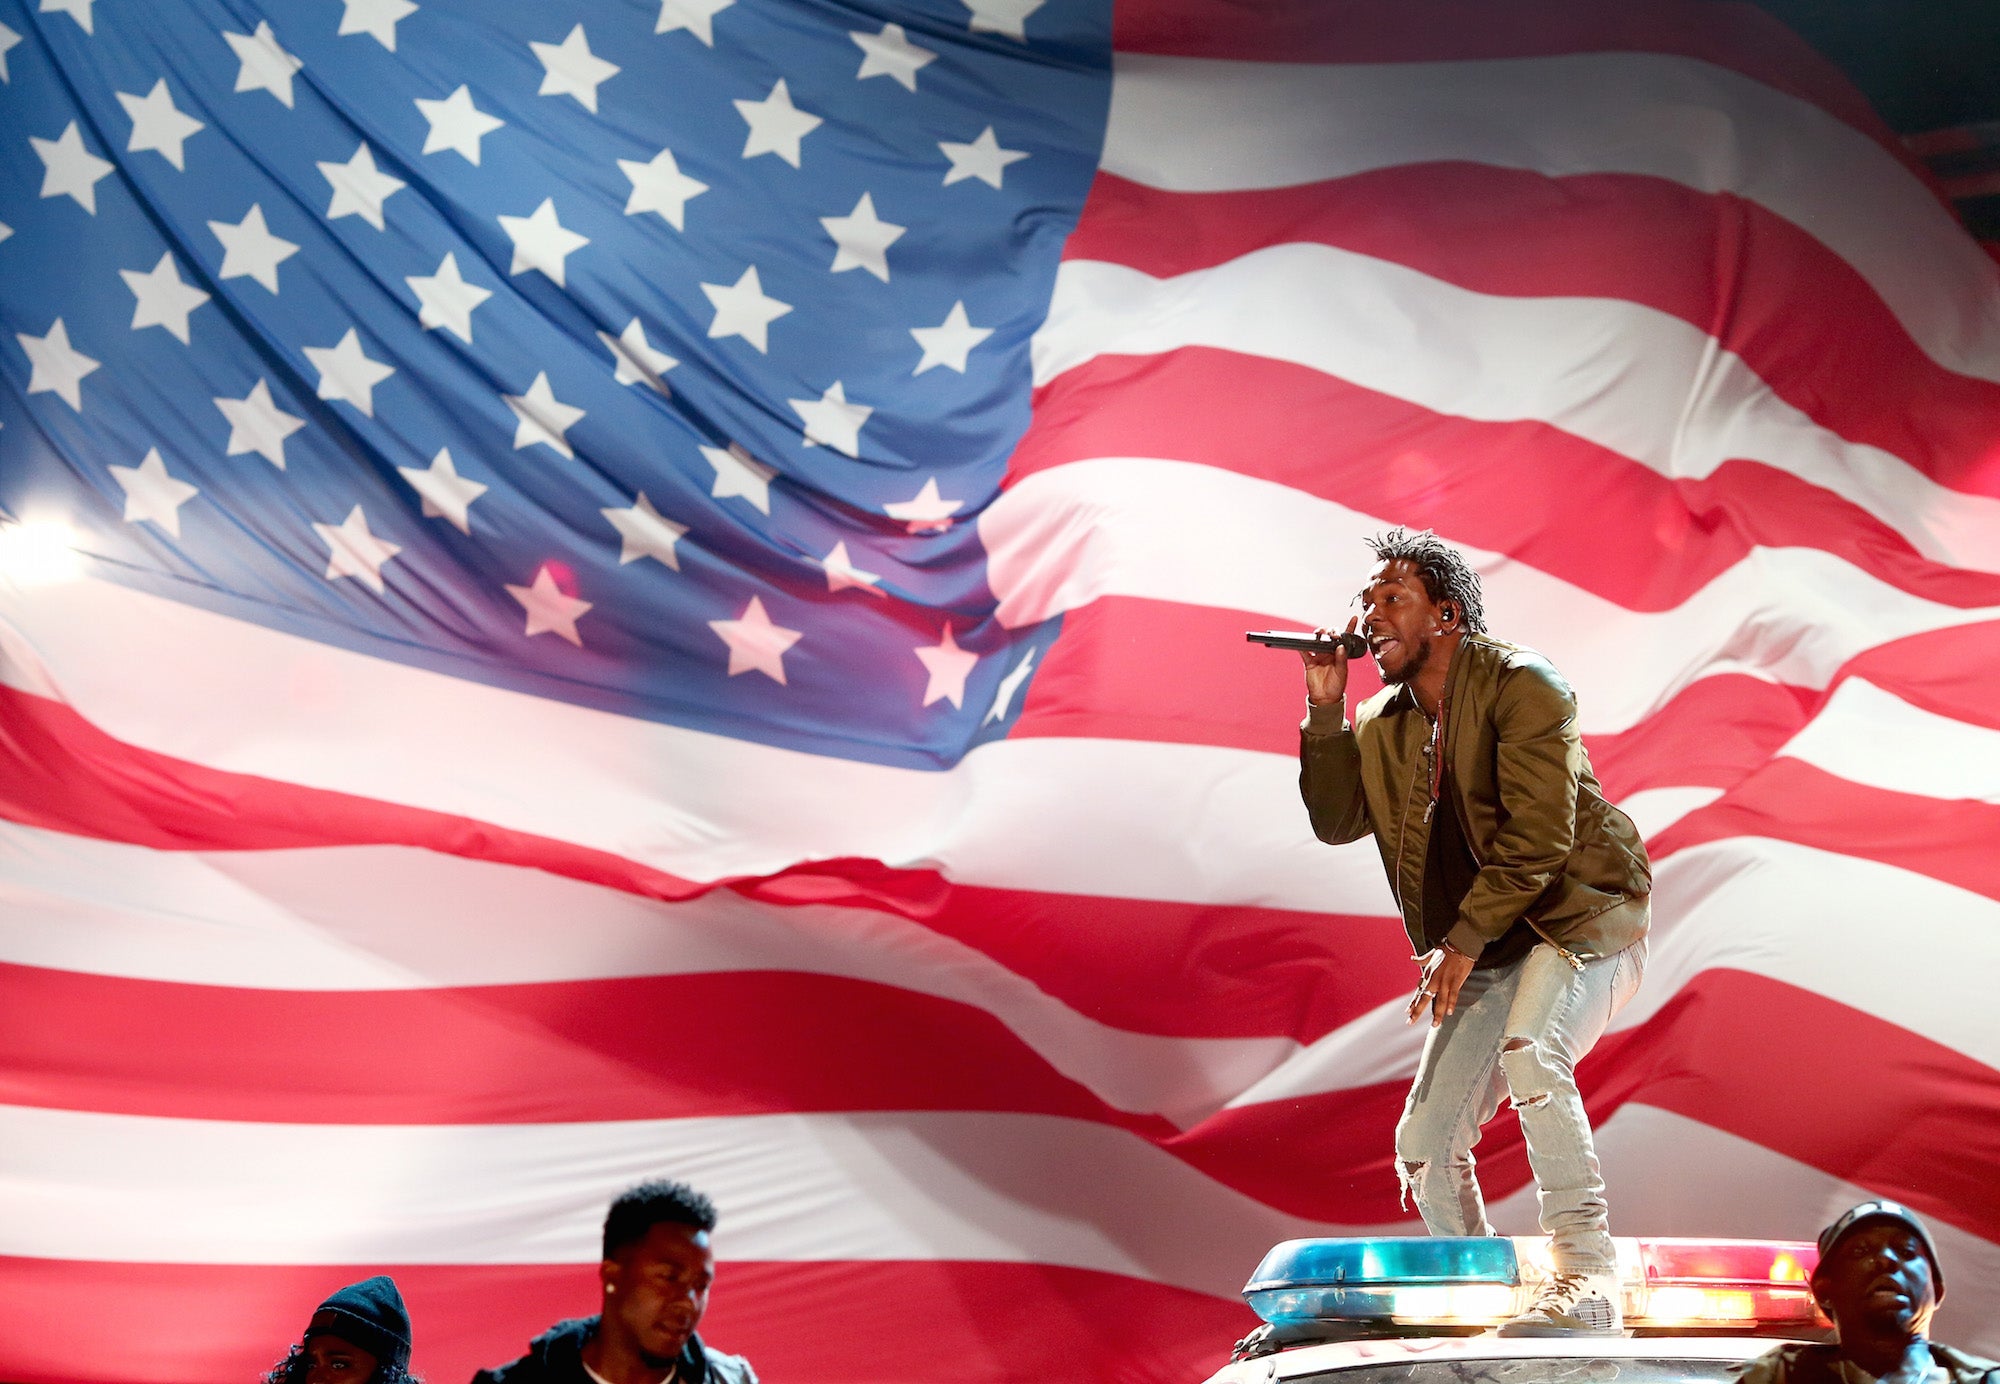 Lamar performs at the 2015 BET Awards in Los Angeles. Getty